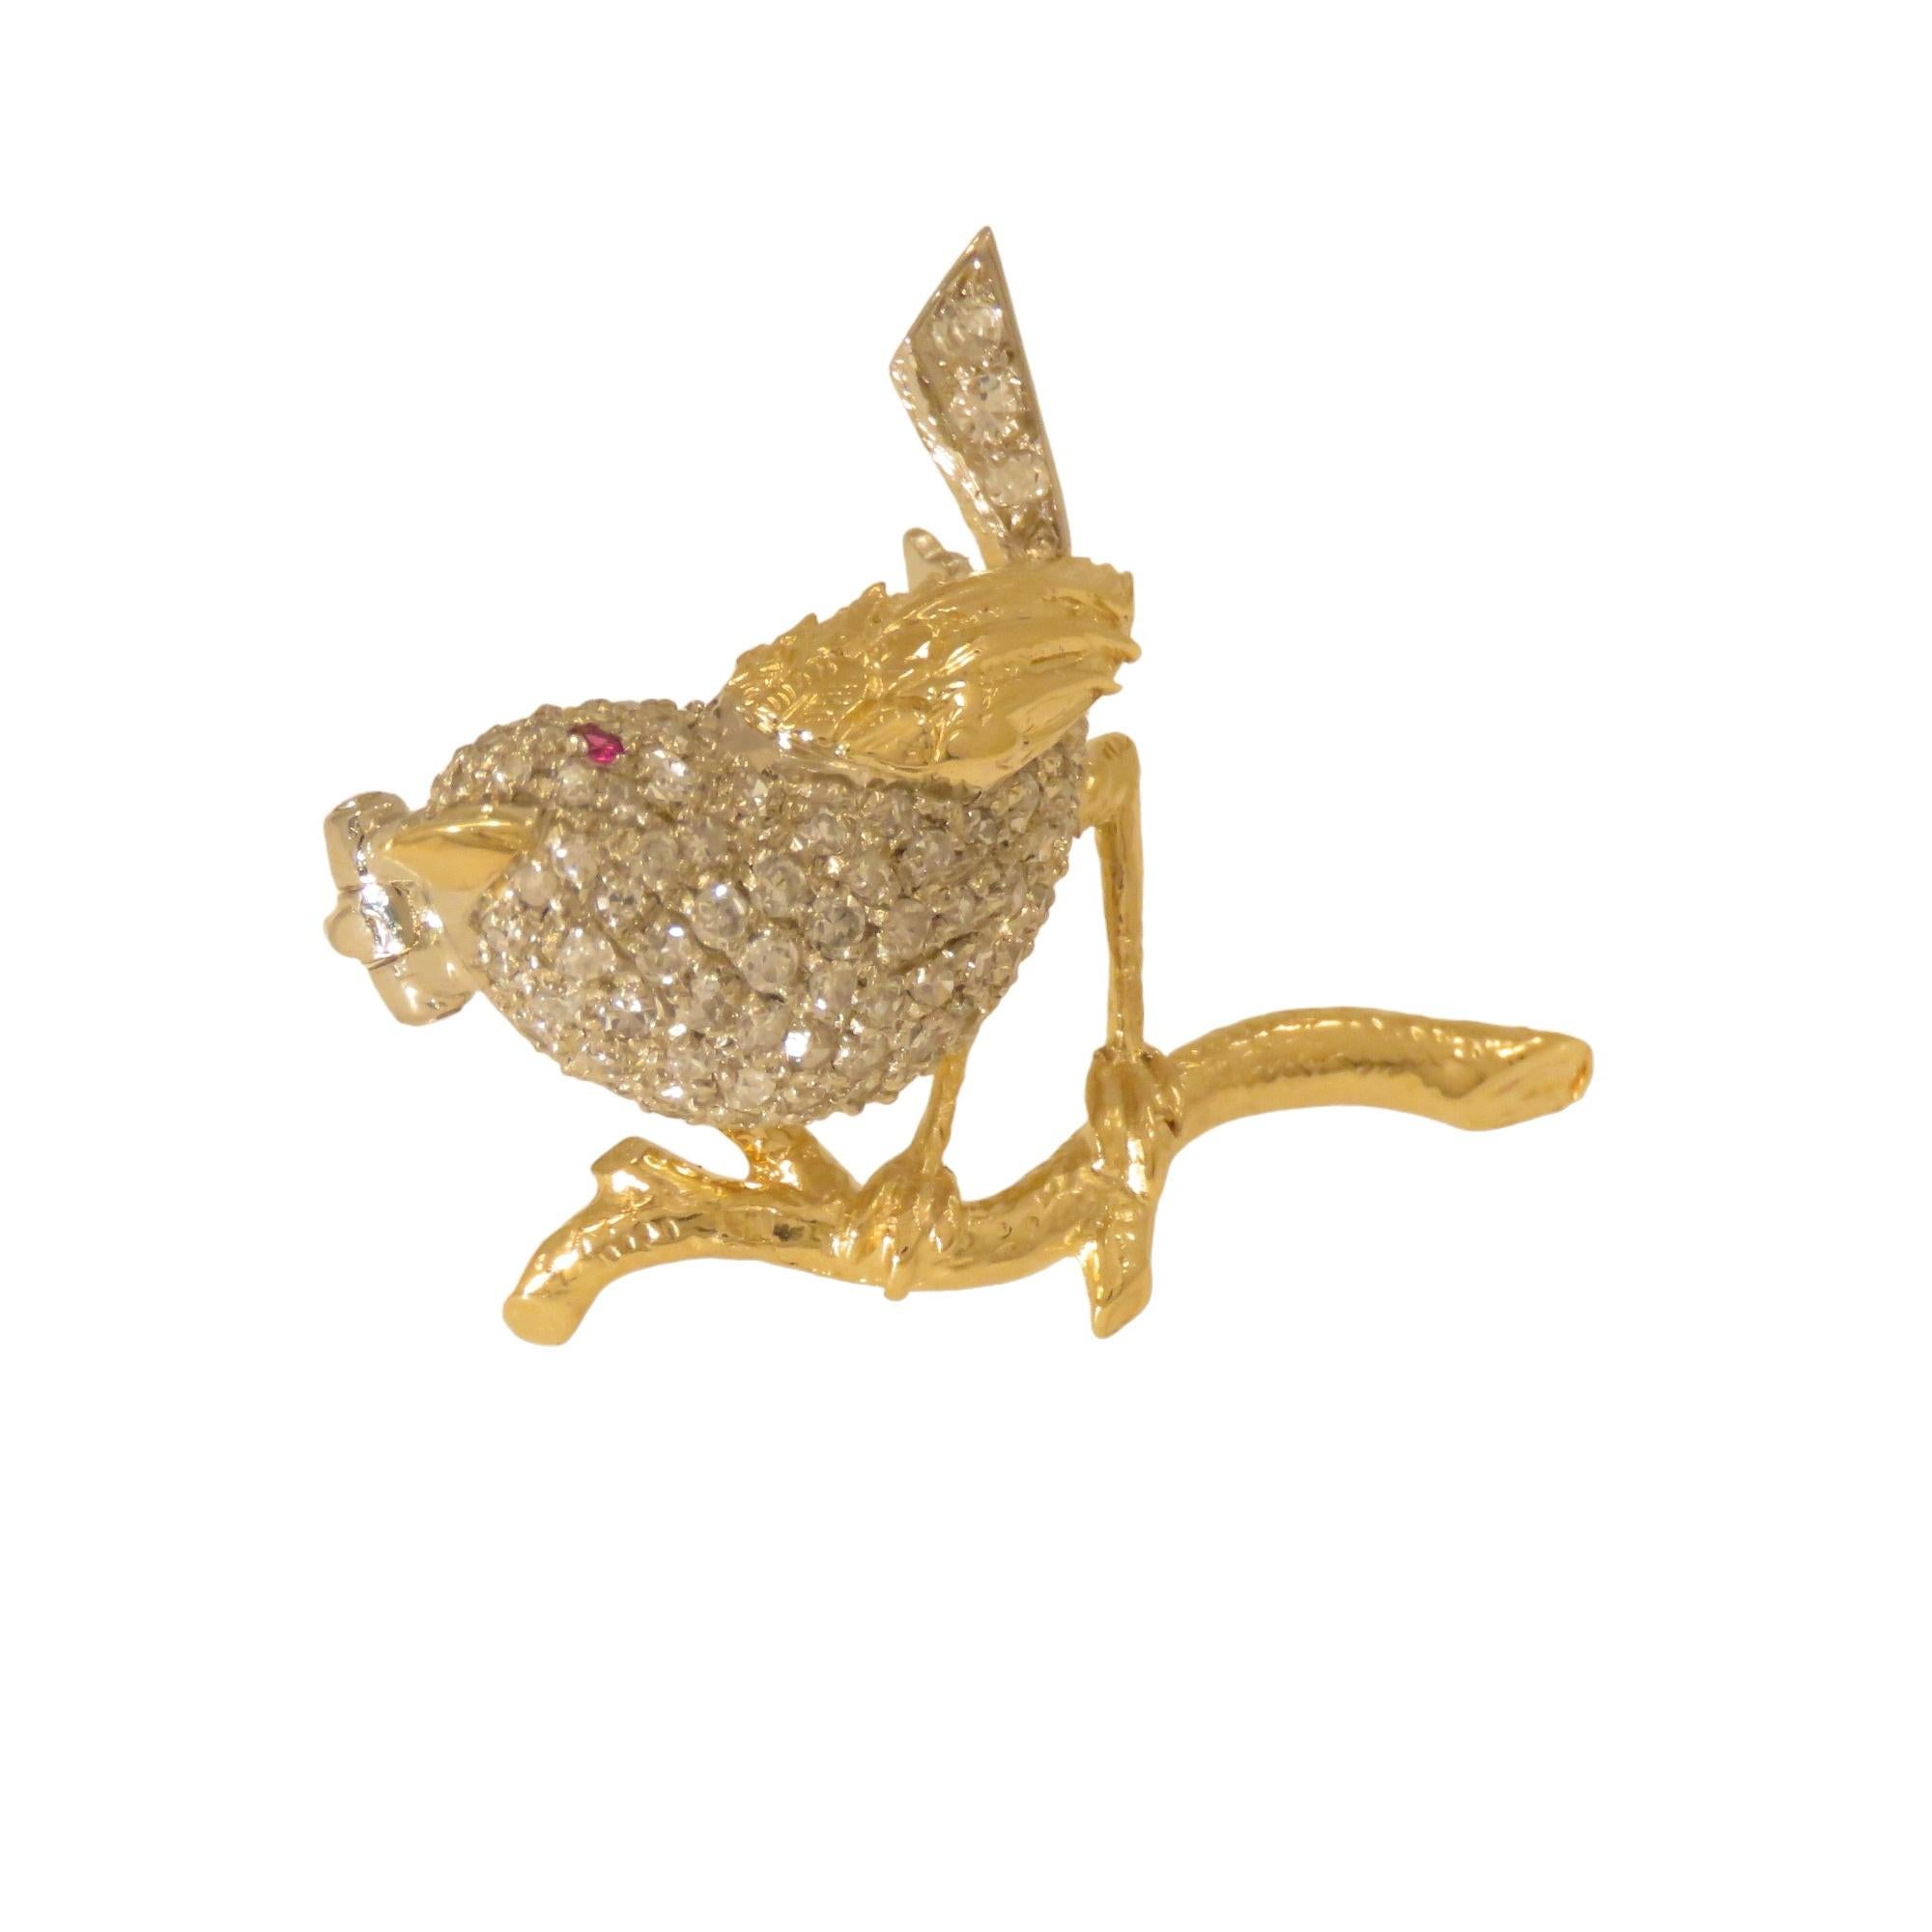 Retro Gold and Diamond Brooch in the Shape of a Bird